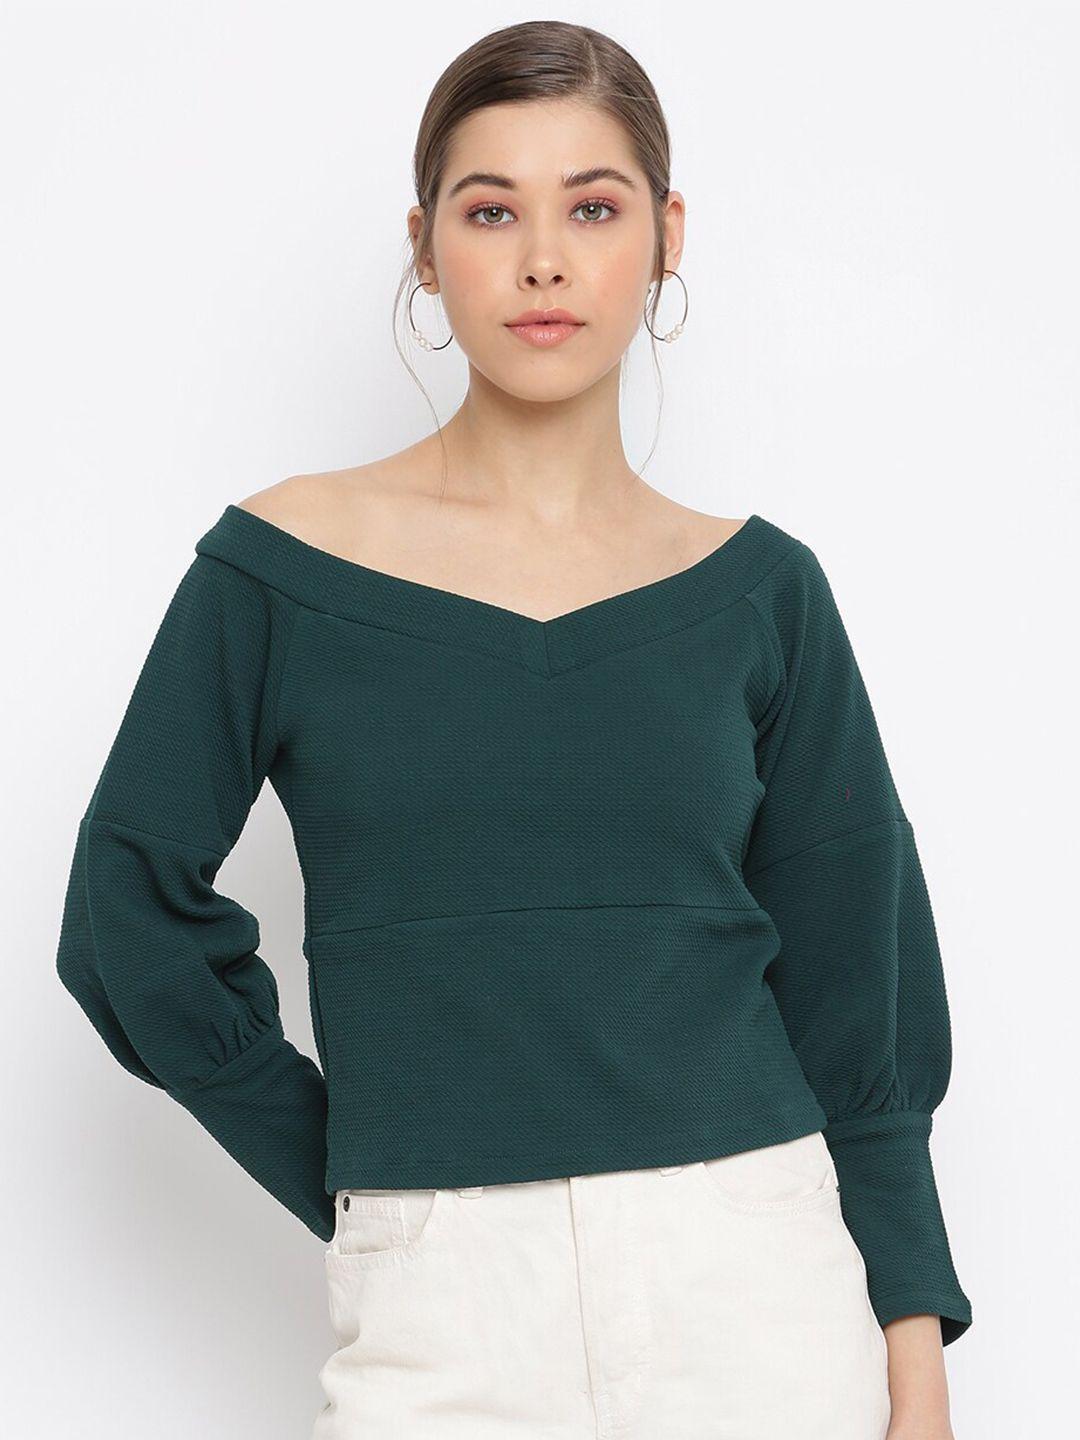 dressberry green long sleeves top